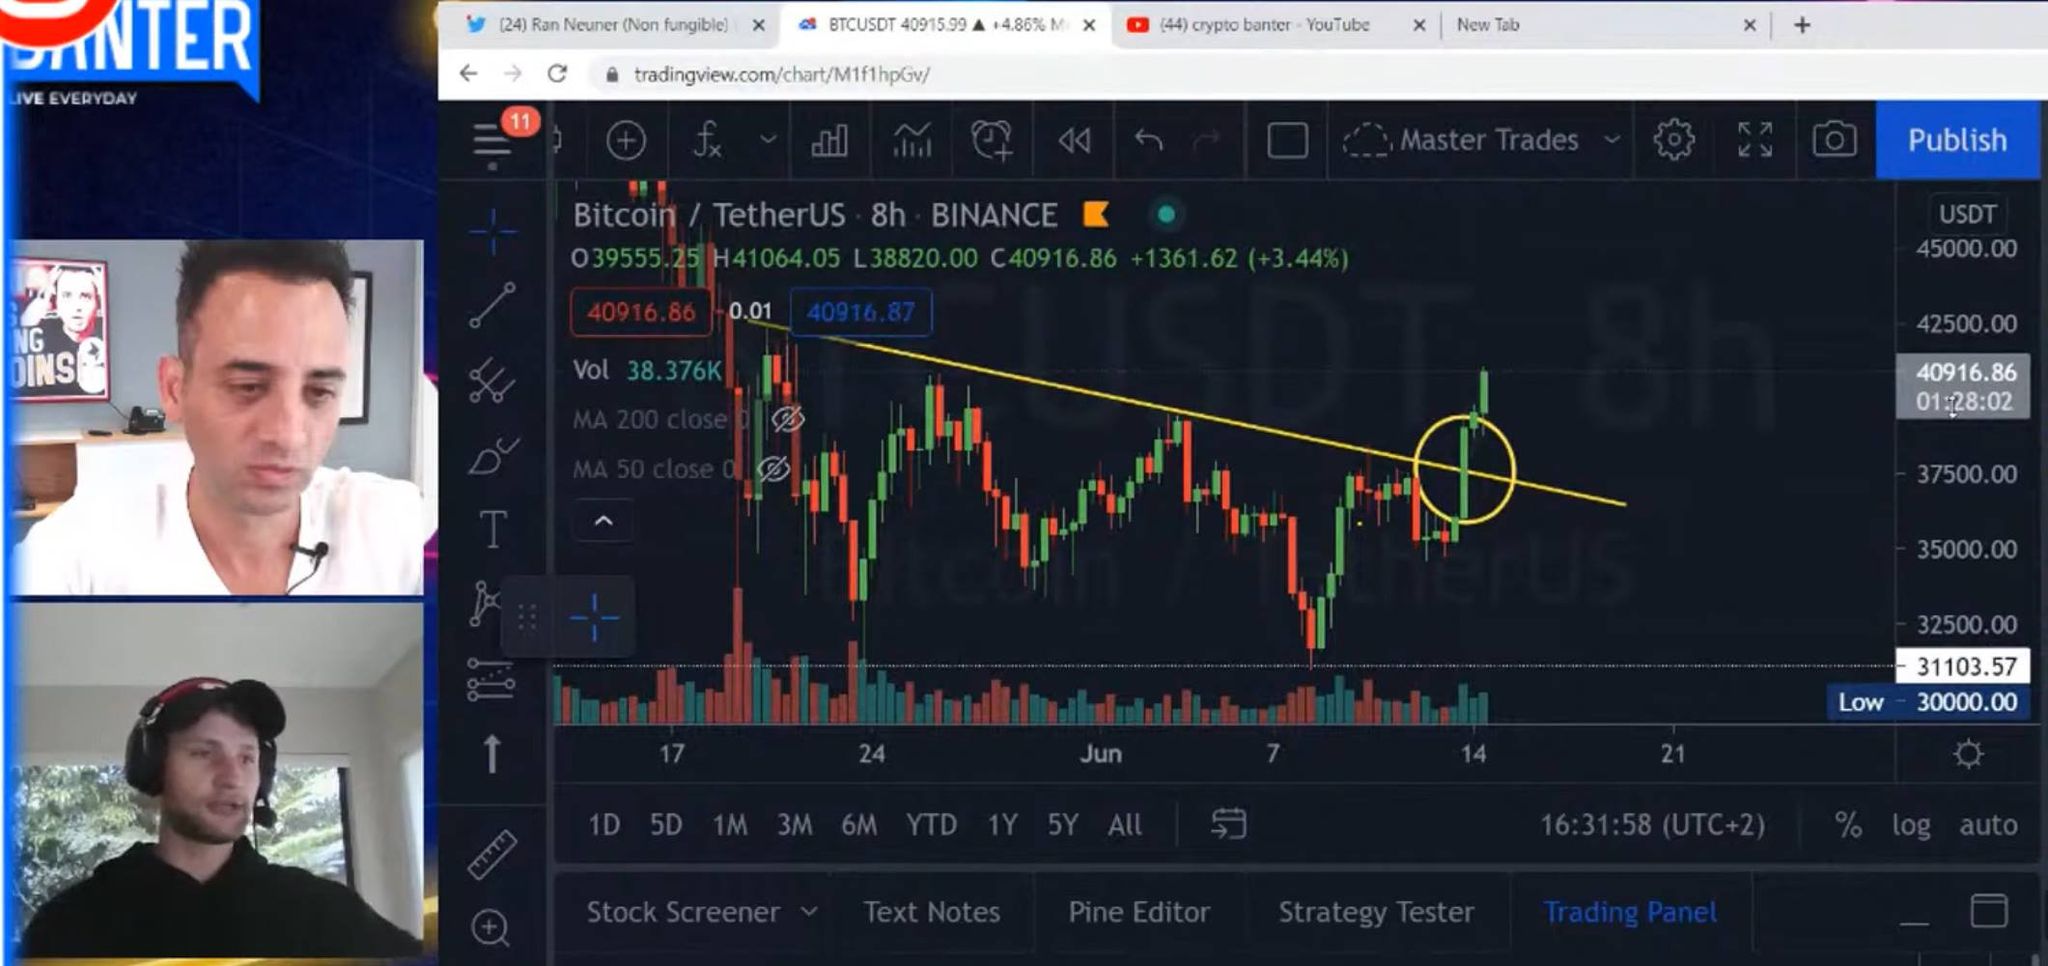 Is a short squeeze in play for Bitcoin? - Crypto Daily